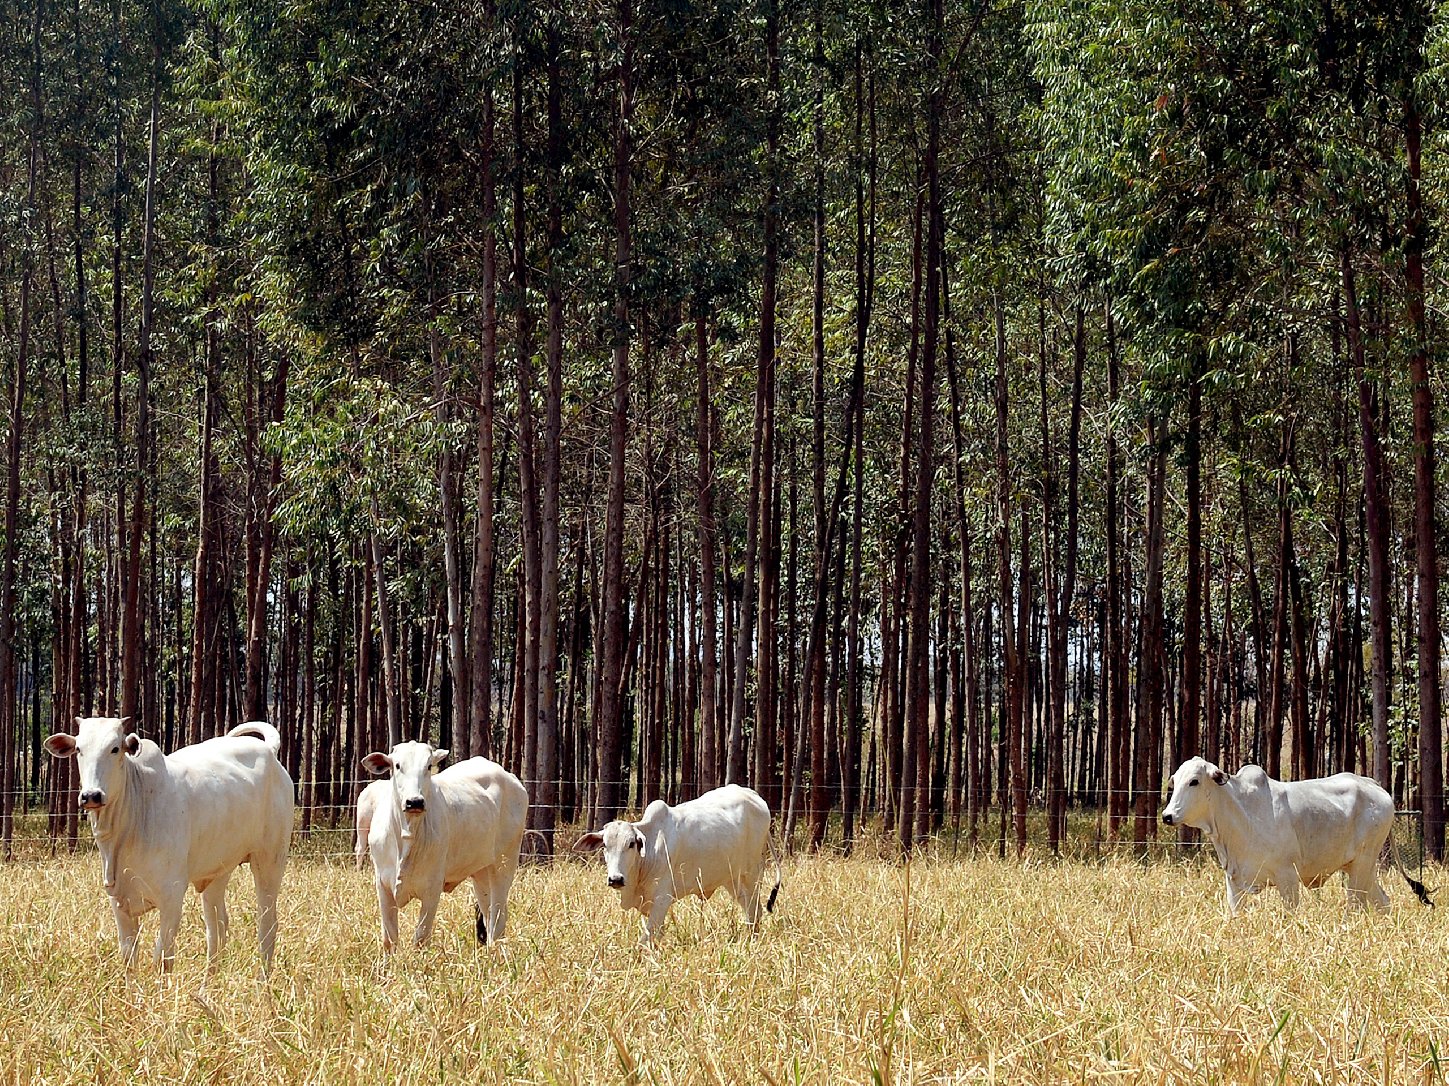 Cattle graze at a Brazilian Agricultural Research experimental farm in Planaltina in Goias state. To reduce emissions from deforestation, the Brazilian government is experimenting with grazing on integrated forest and pasture lands. Photo: Evaristo Sa/AFP/Getty Images